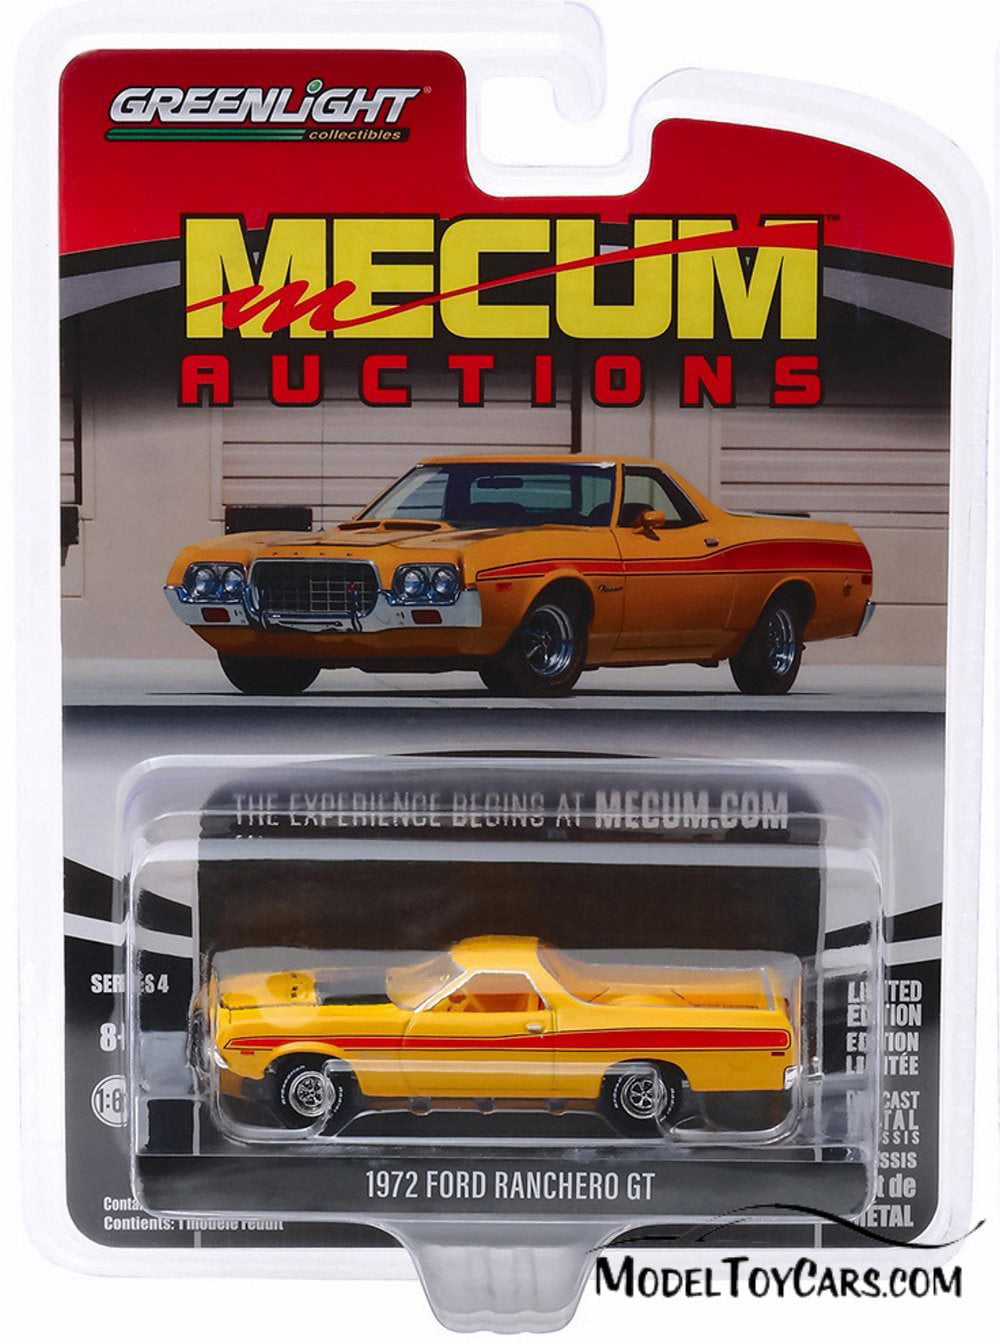 LAS VEGAS 2018 SOLID PACK Details about   GREENLIGHT GL37190-D 1/64 1972 FORD RANCHERO GT